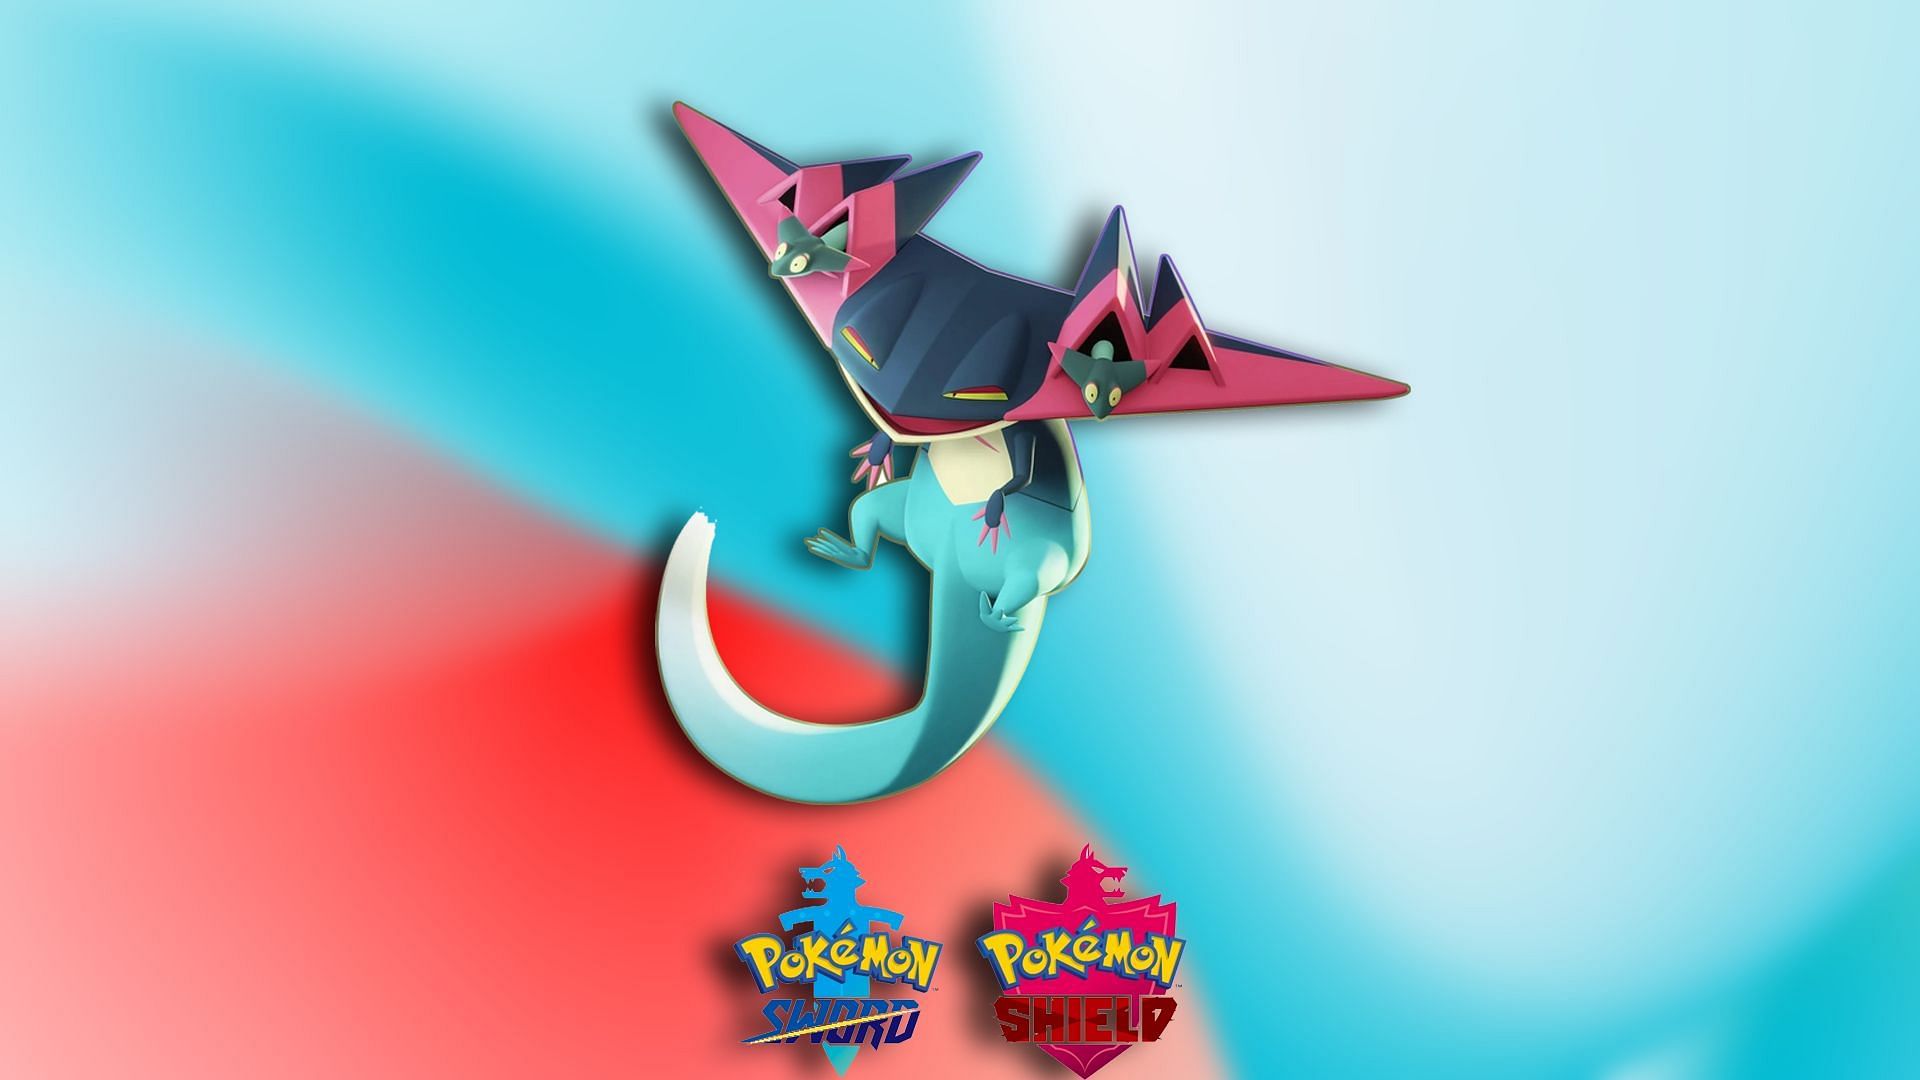 Dragapult - the best team for Pokemon Sword and Shield (Image via TPC)